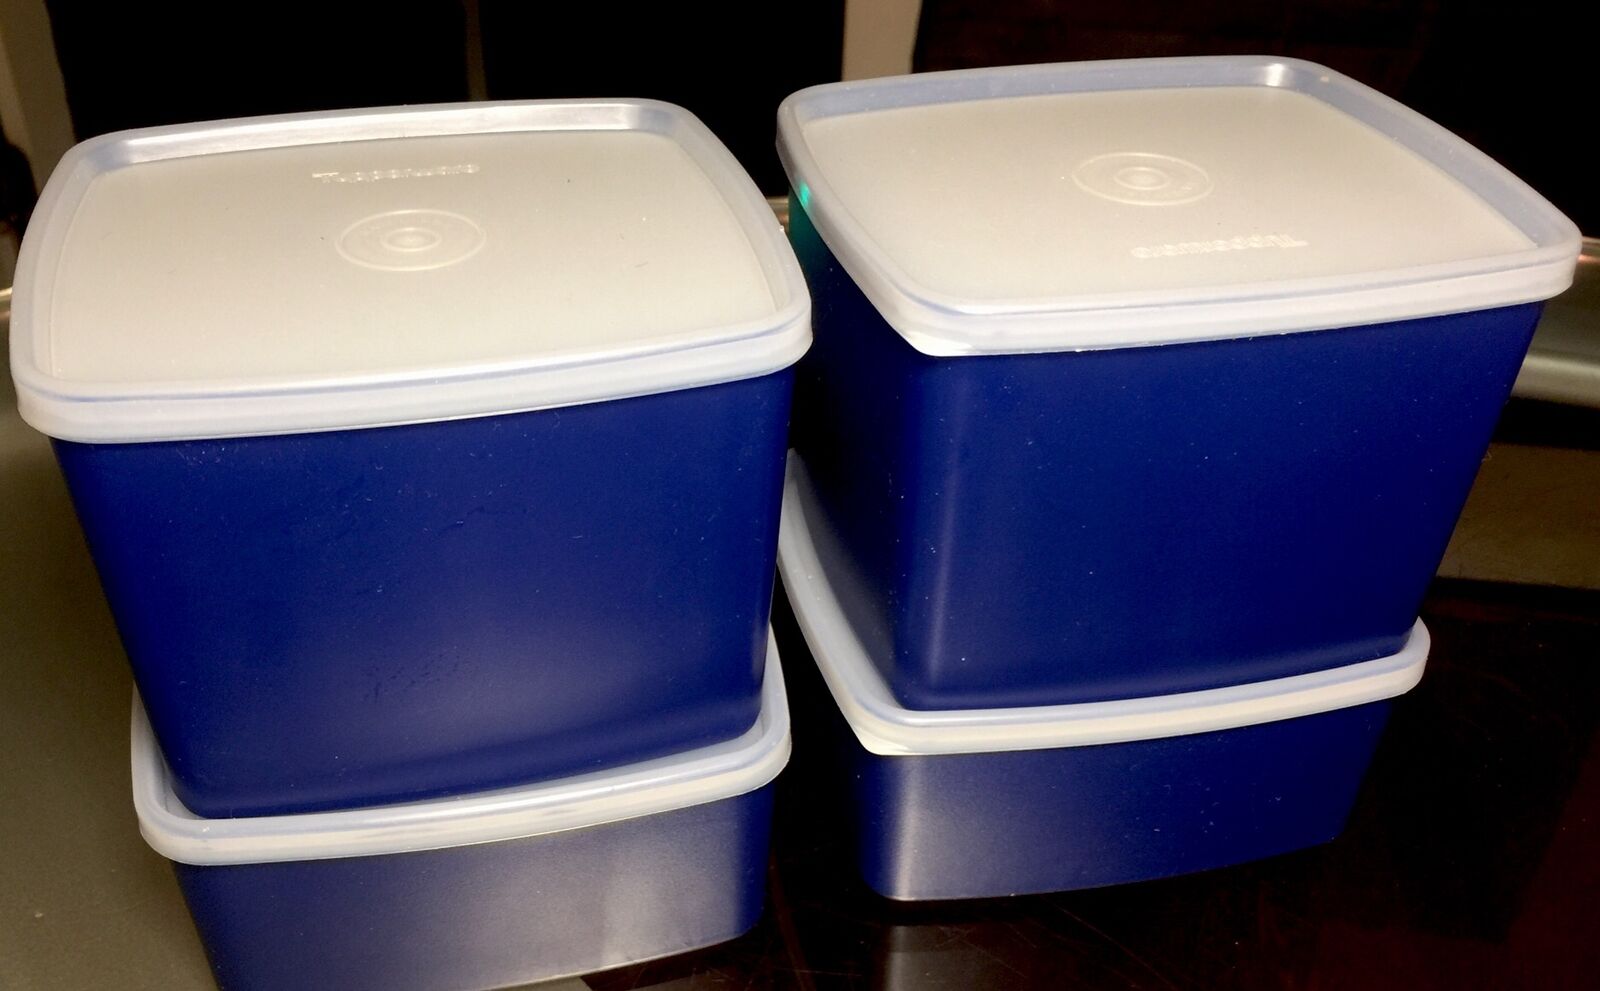 NEW USA VINTAGE TUPPERWARE “Millionaire Line”Set of 4 Containers #311,312 wSeals